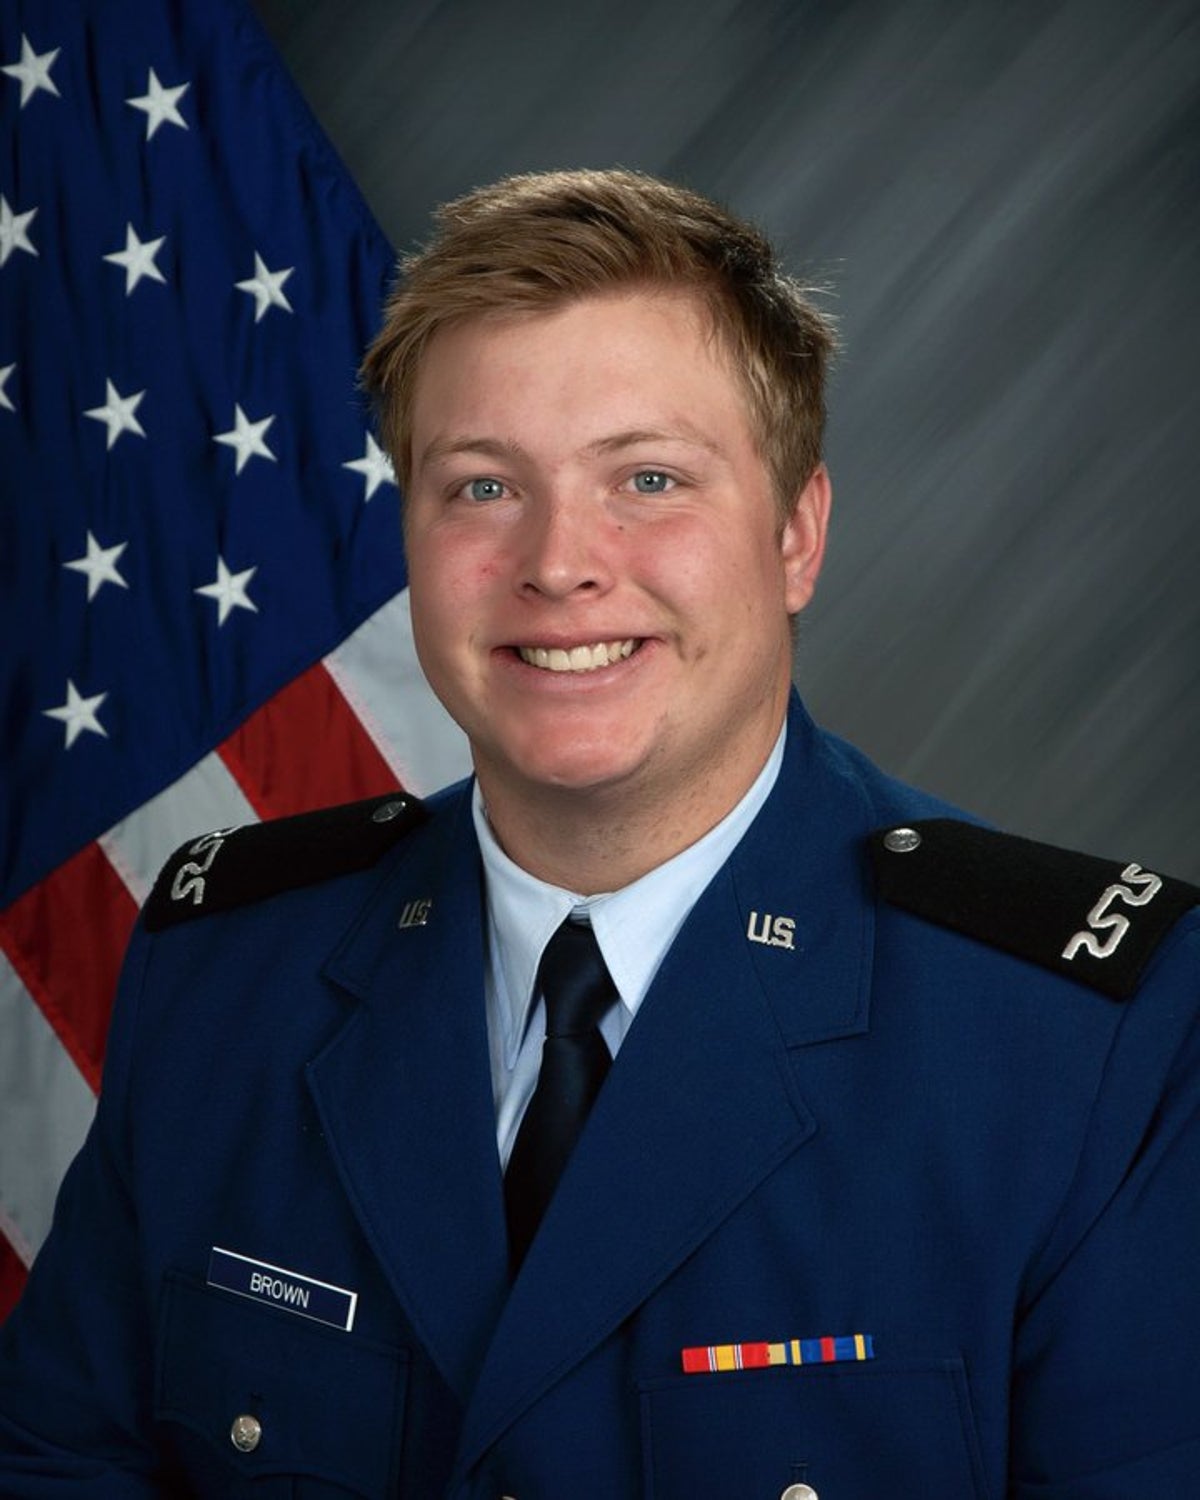 Air Force Falcons football player dies suddenly aged 21